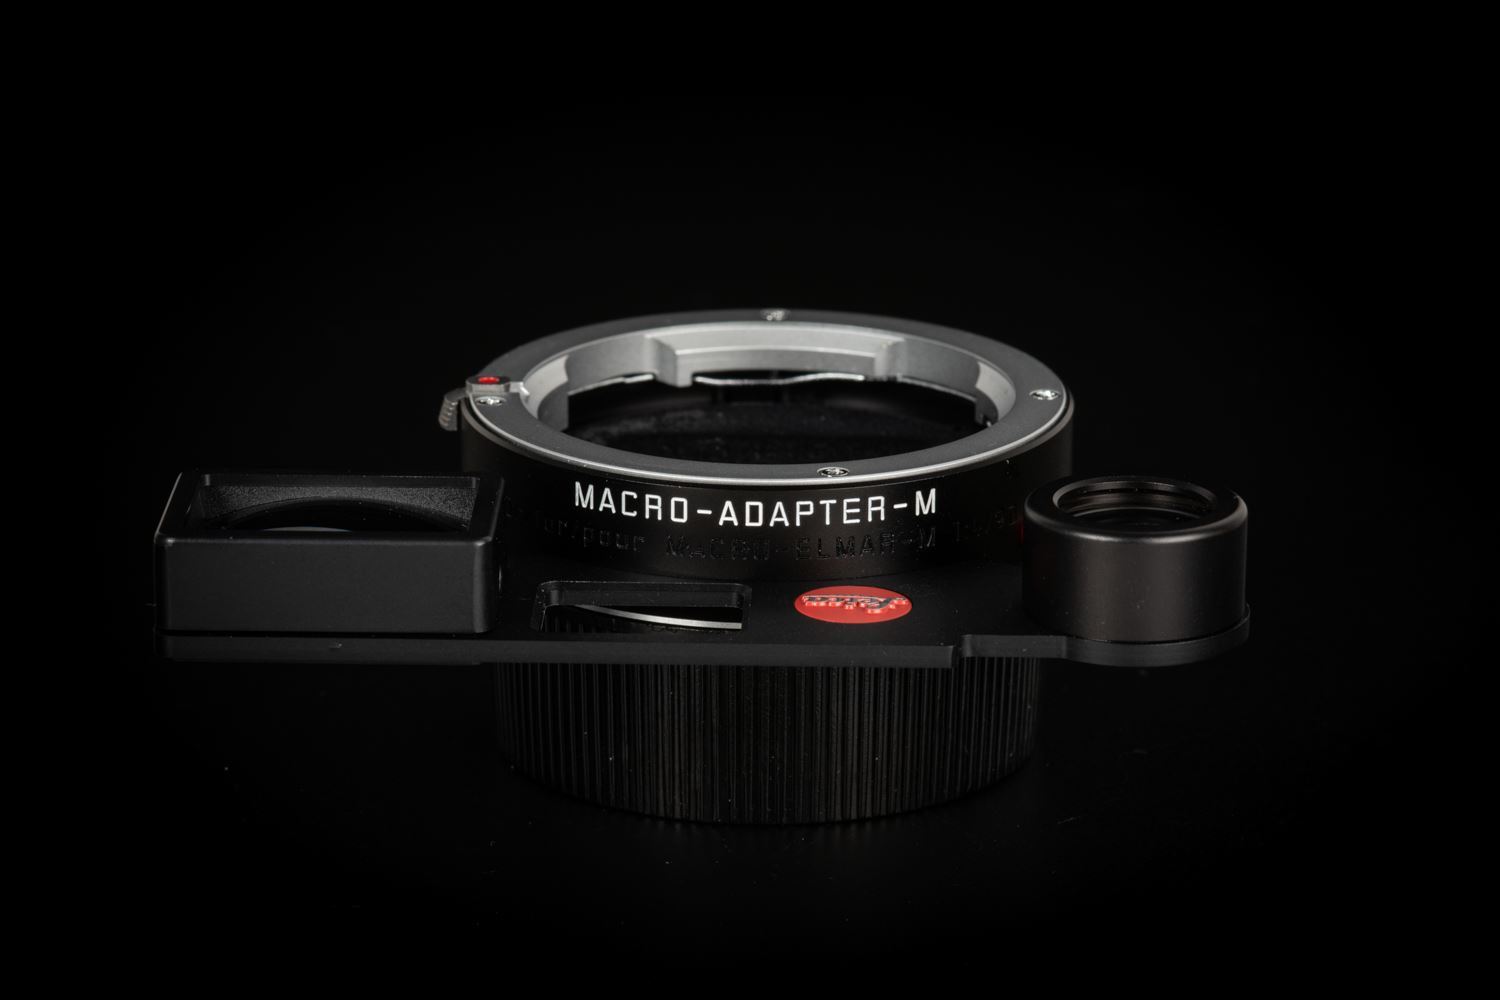 Picture of Leica Macro-Elmar-M 90mm f/4 Silver with Macro-Adapter